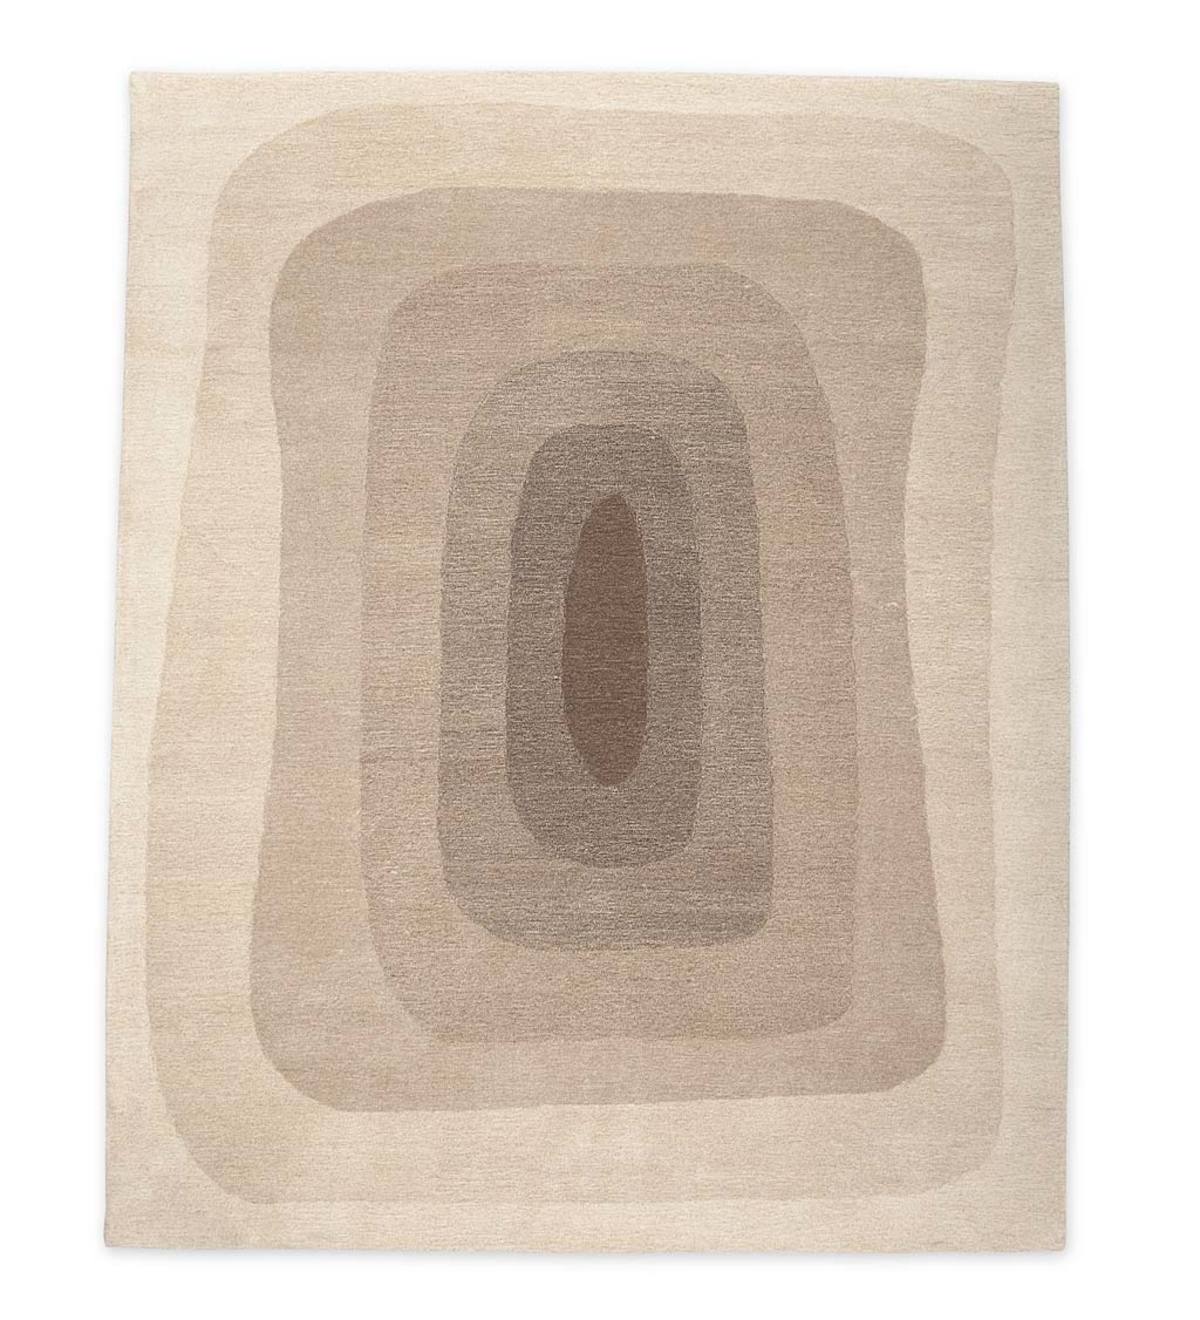 Hand Tufted Fusion Wool Area Rugs